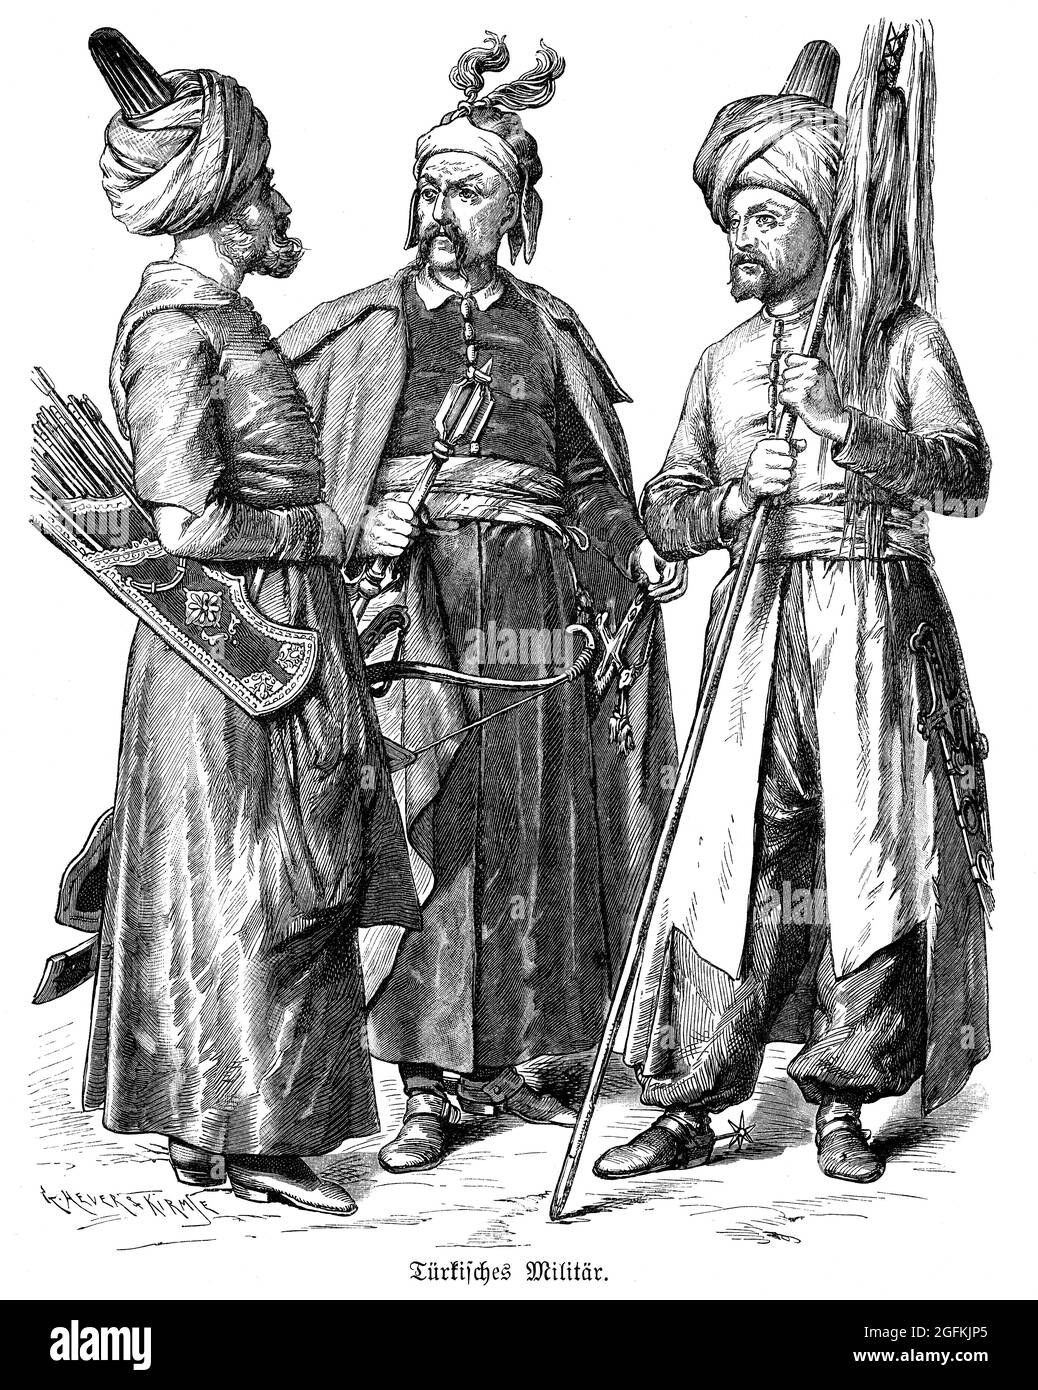 Three Turkish Military Officers with historic weapons in Army Uniforms with headscarfs. Ottoman Empire İstanbul, Turkey. Engraving in black and white Stock Photo